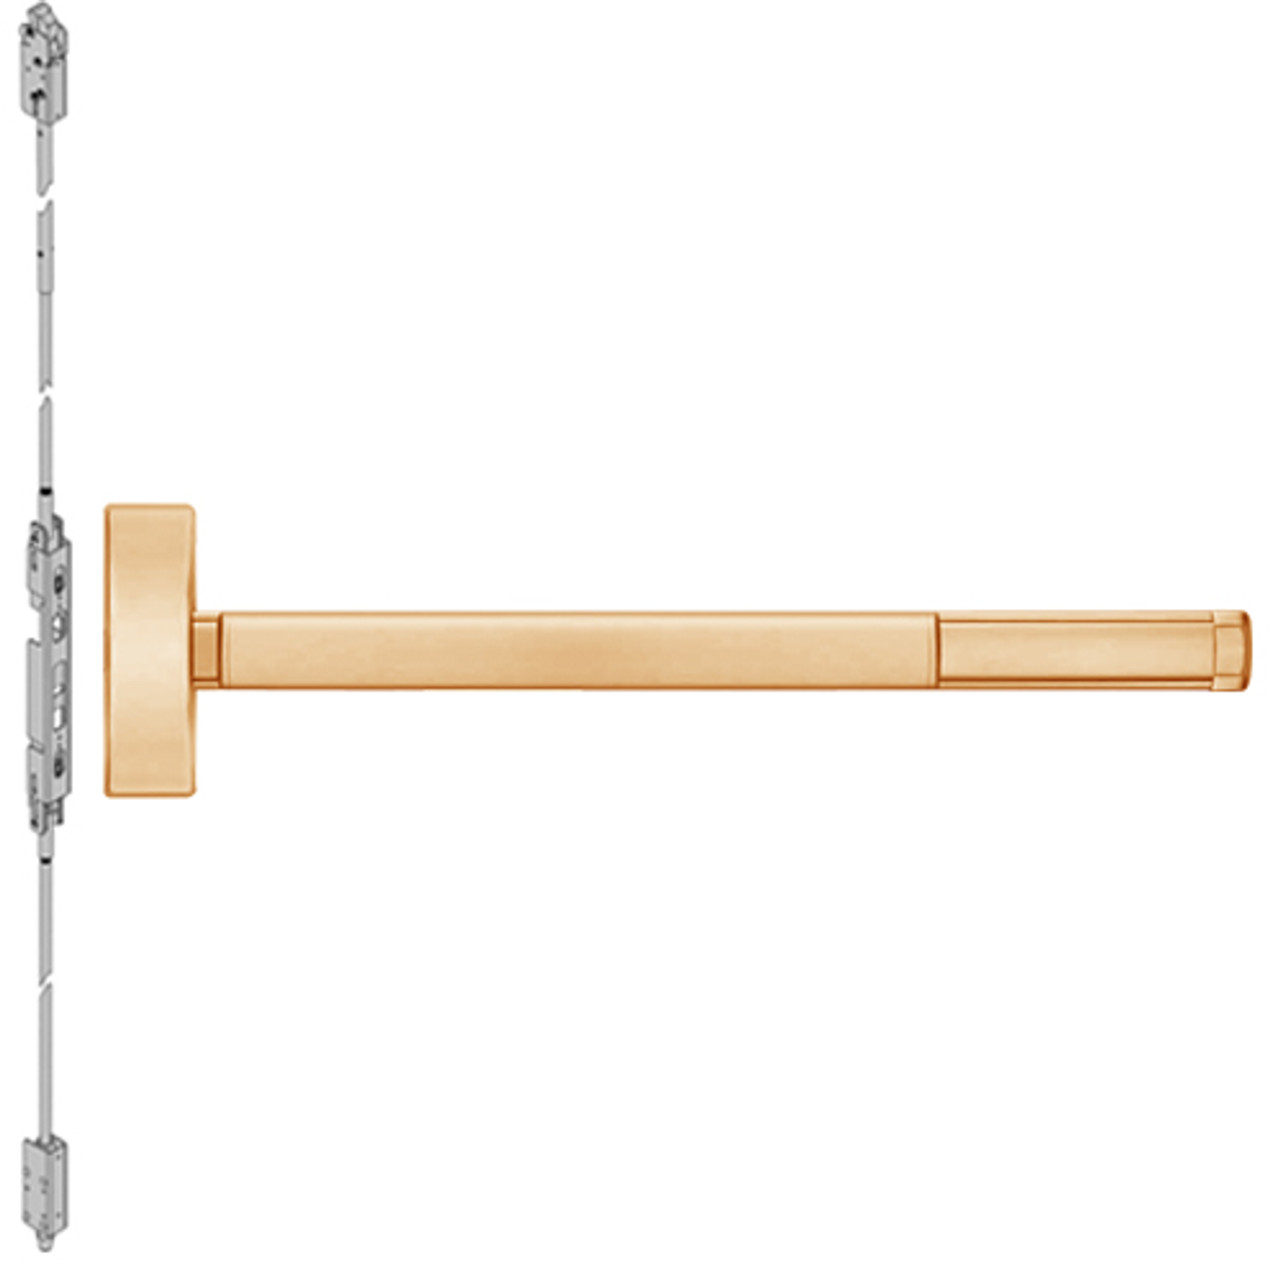 FL2802-612-48 PHI 2800 Series Fire Rated Concealed Vertical Rod Exit Device Prepped for Dummy Trim in Satin Bronze Finish